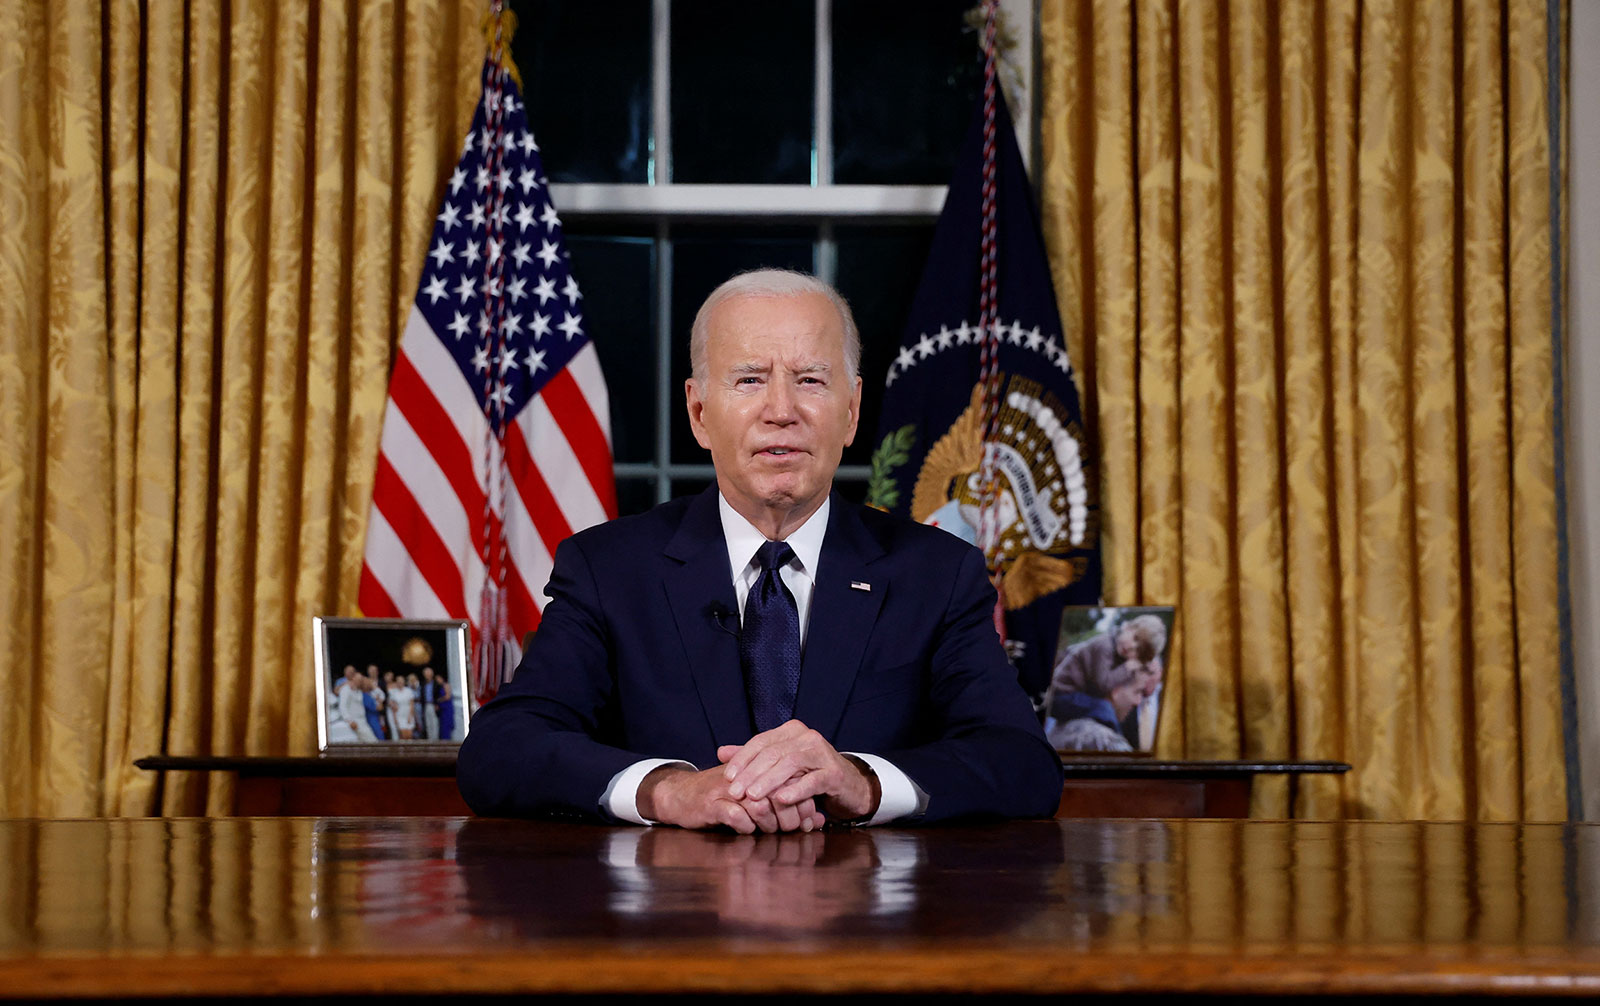 Biden delivers a prime-time address from the Oval Office on Thursday, October 19.